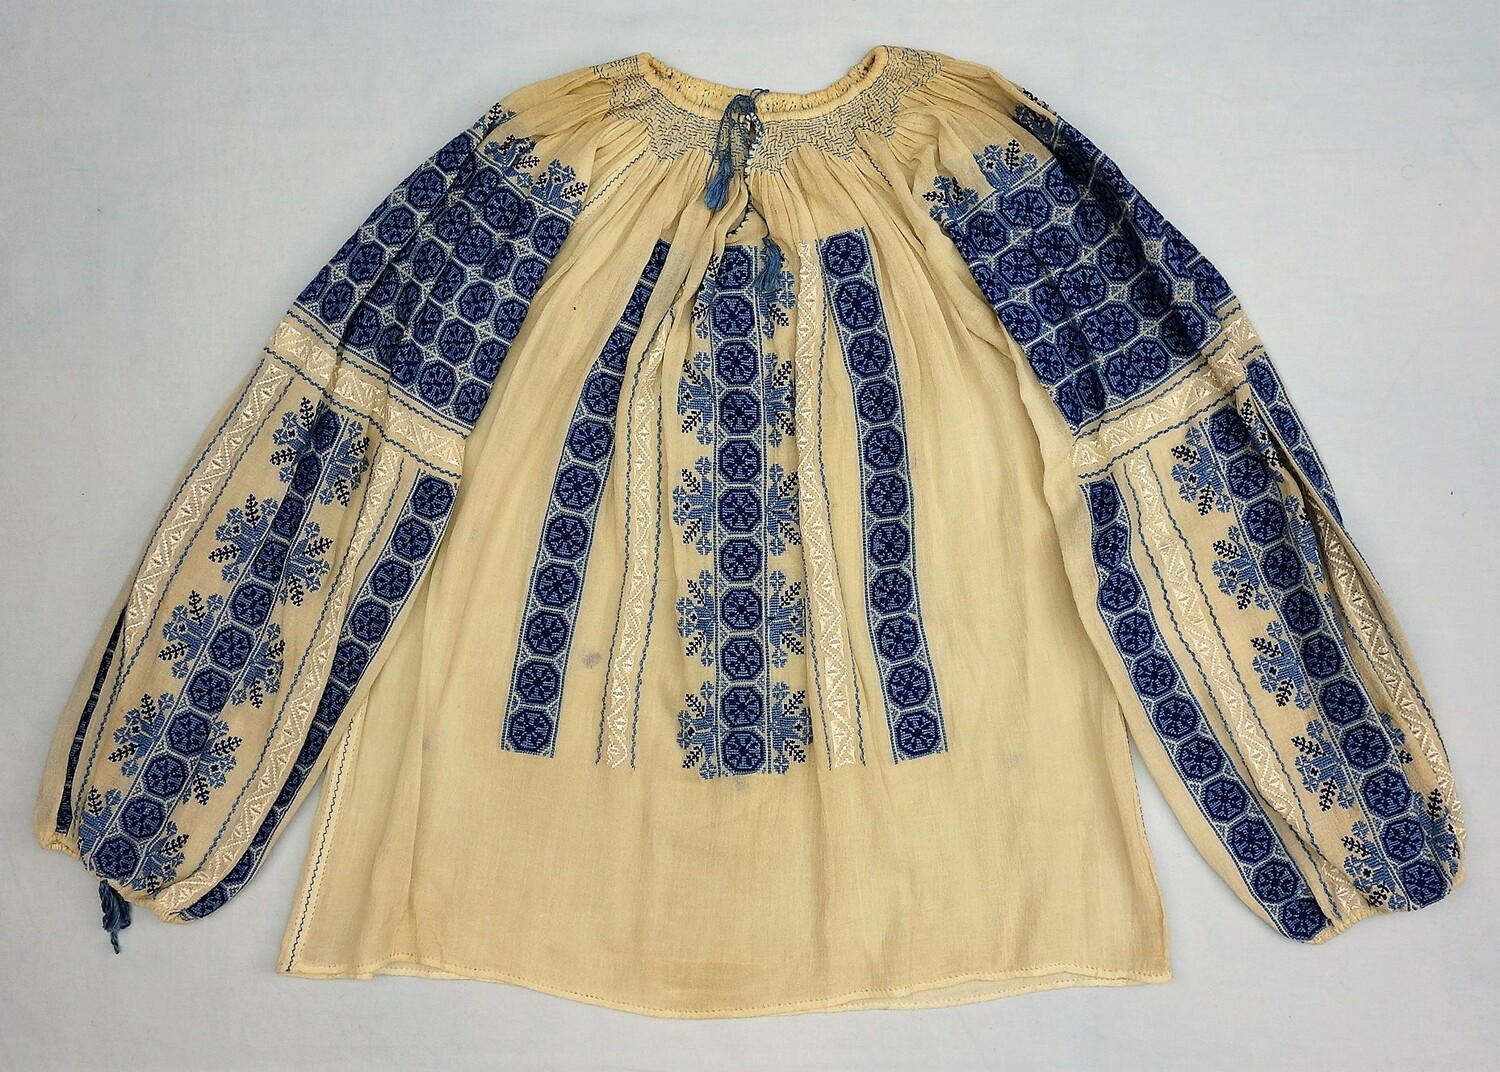 Hand embroidered woman's blouse from Germany, 1930s (TRC 2011.0106).